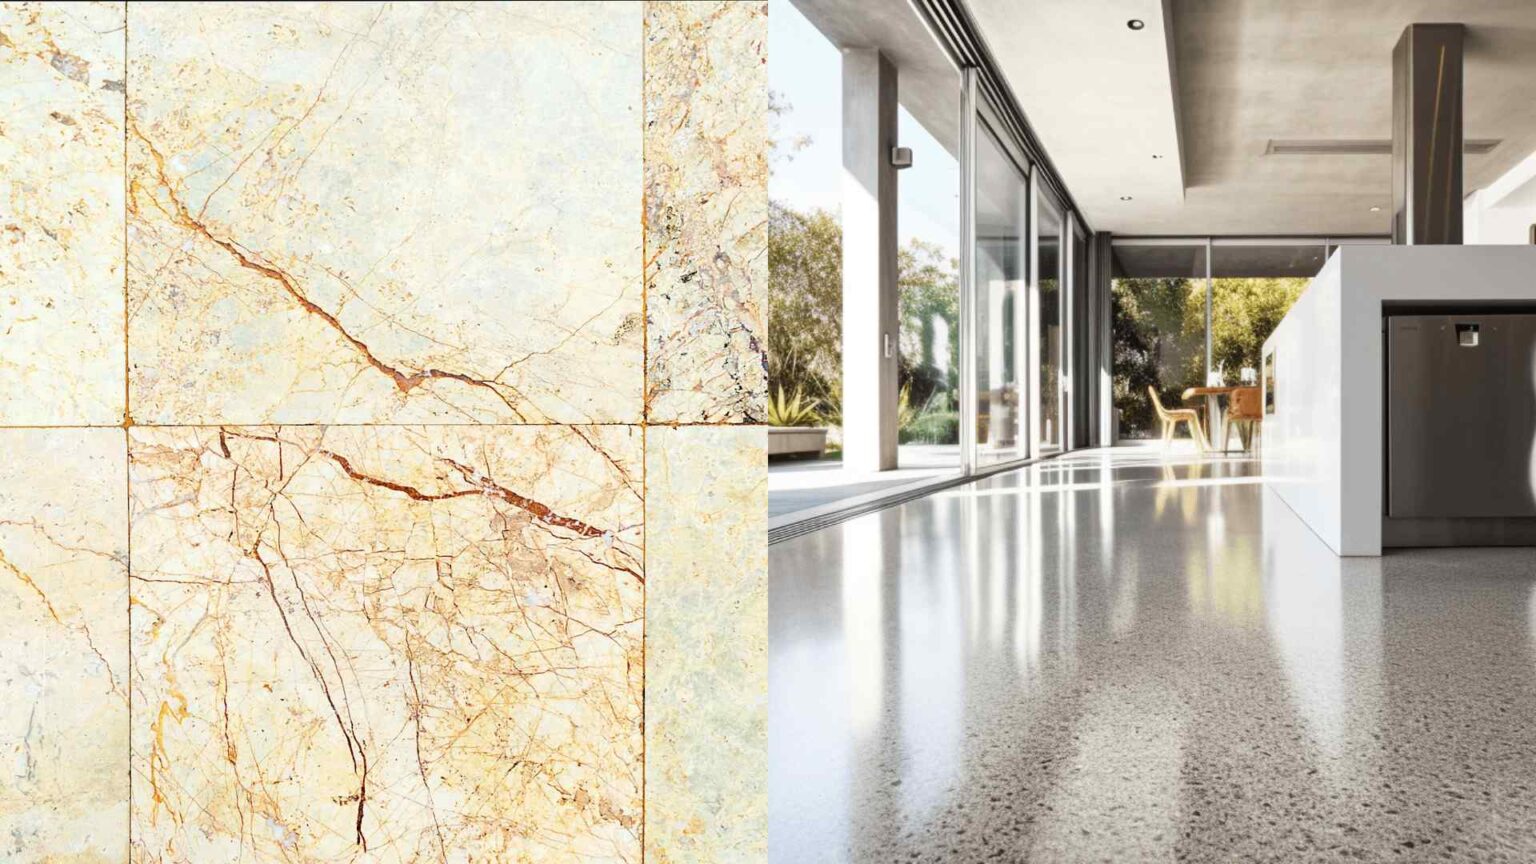 Cost of tiles vs polished concrete flooring